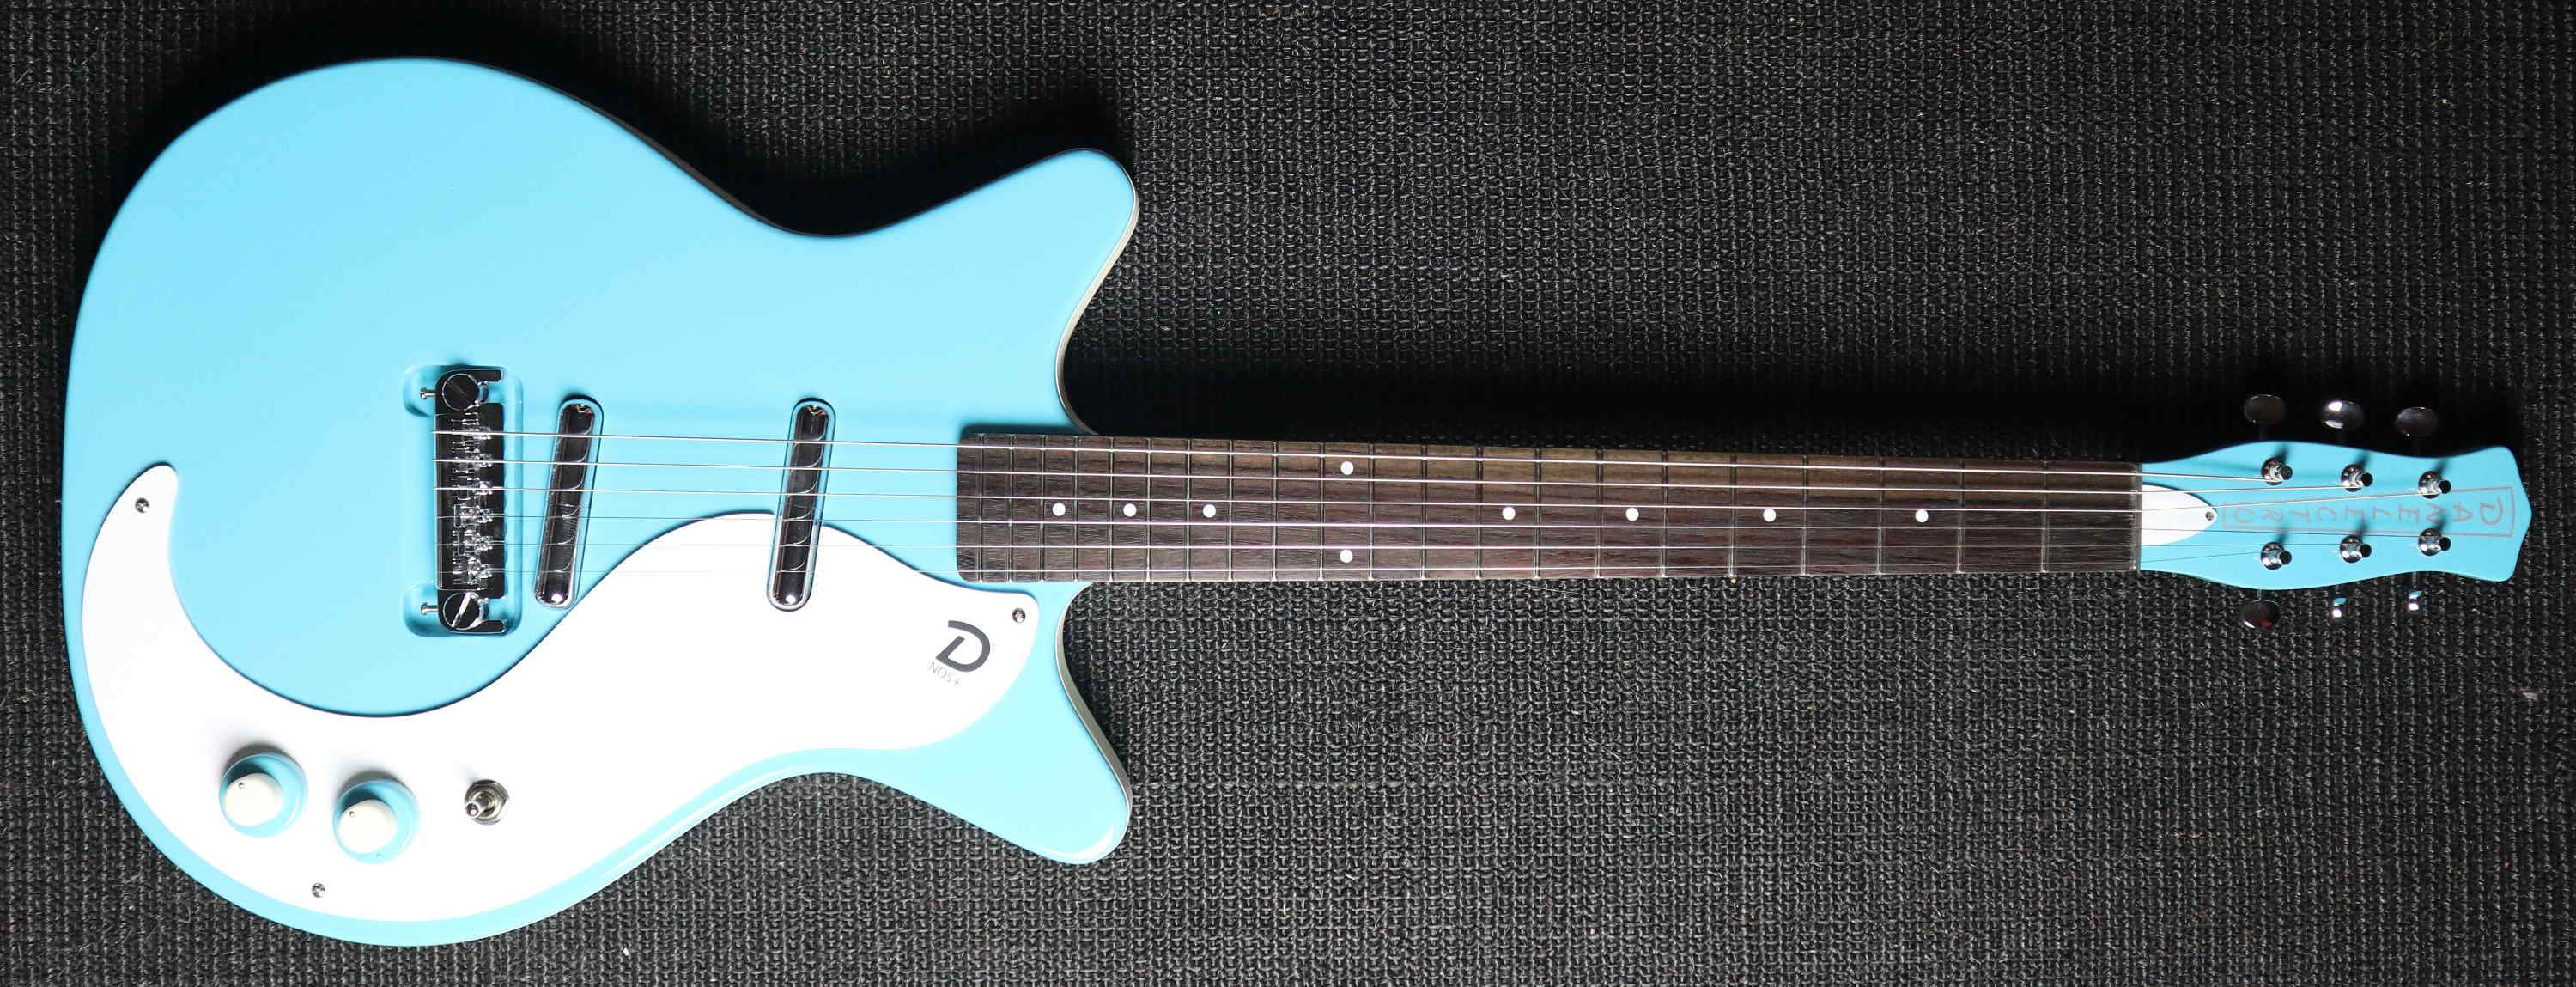 Danelectro '59M NOS Guitar ~ Baby Come Back Blue, Electric Guitar for sale at Richards Guitars.